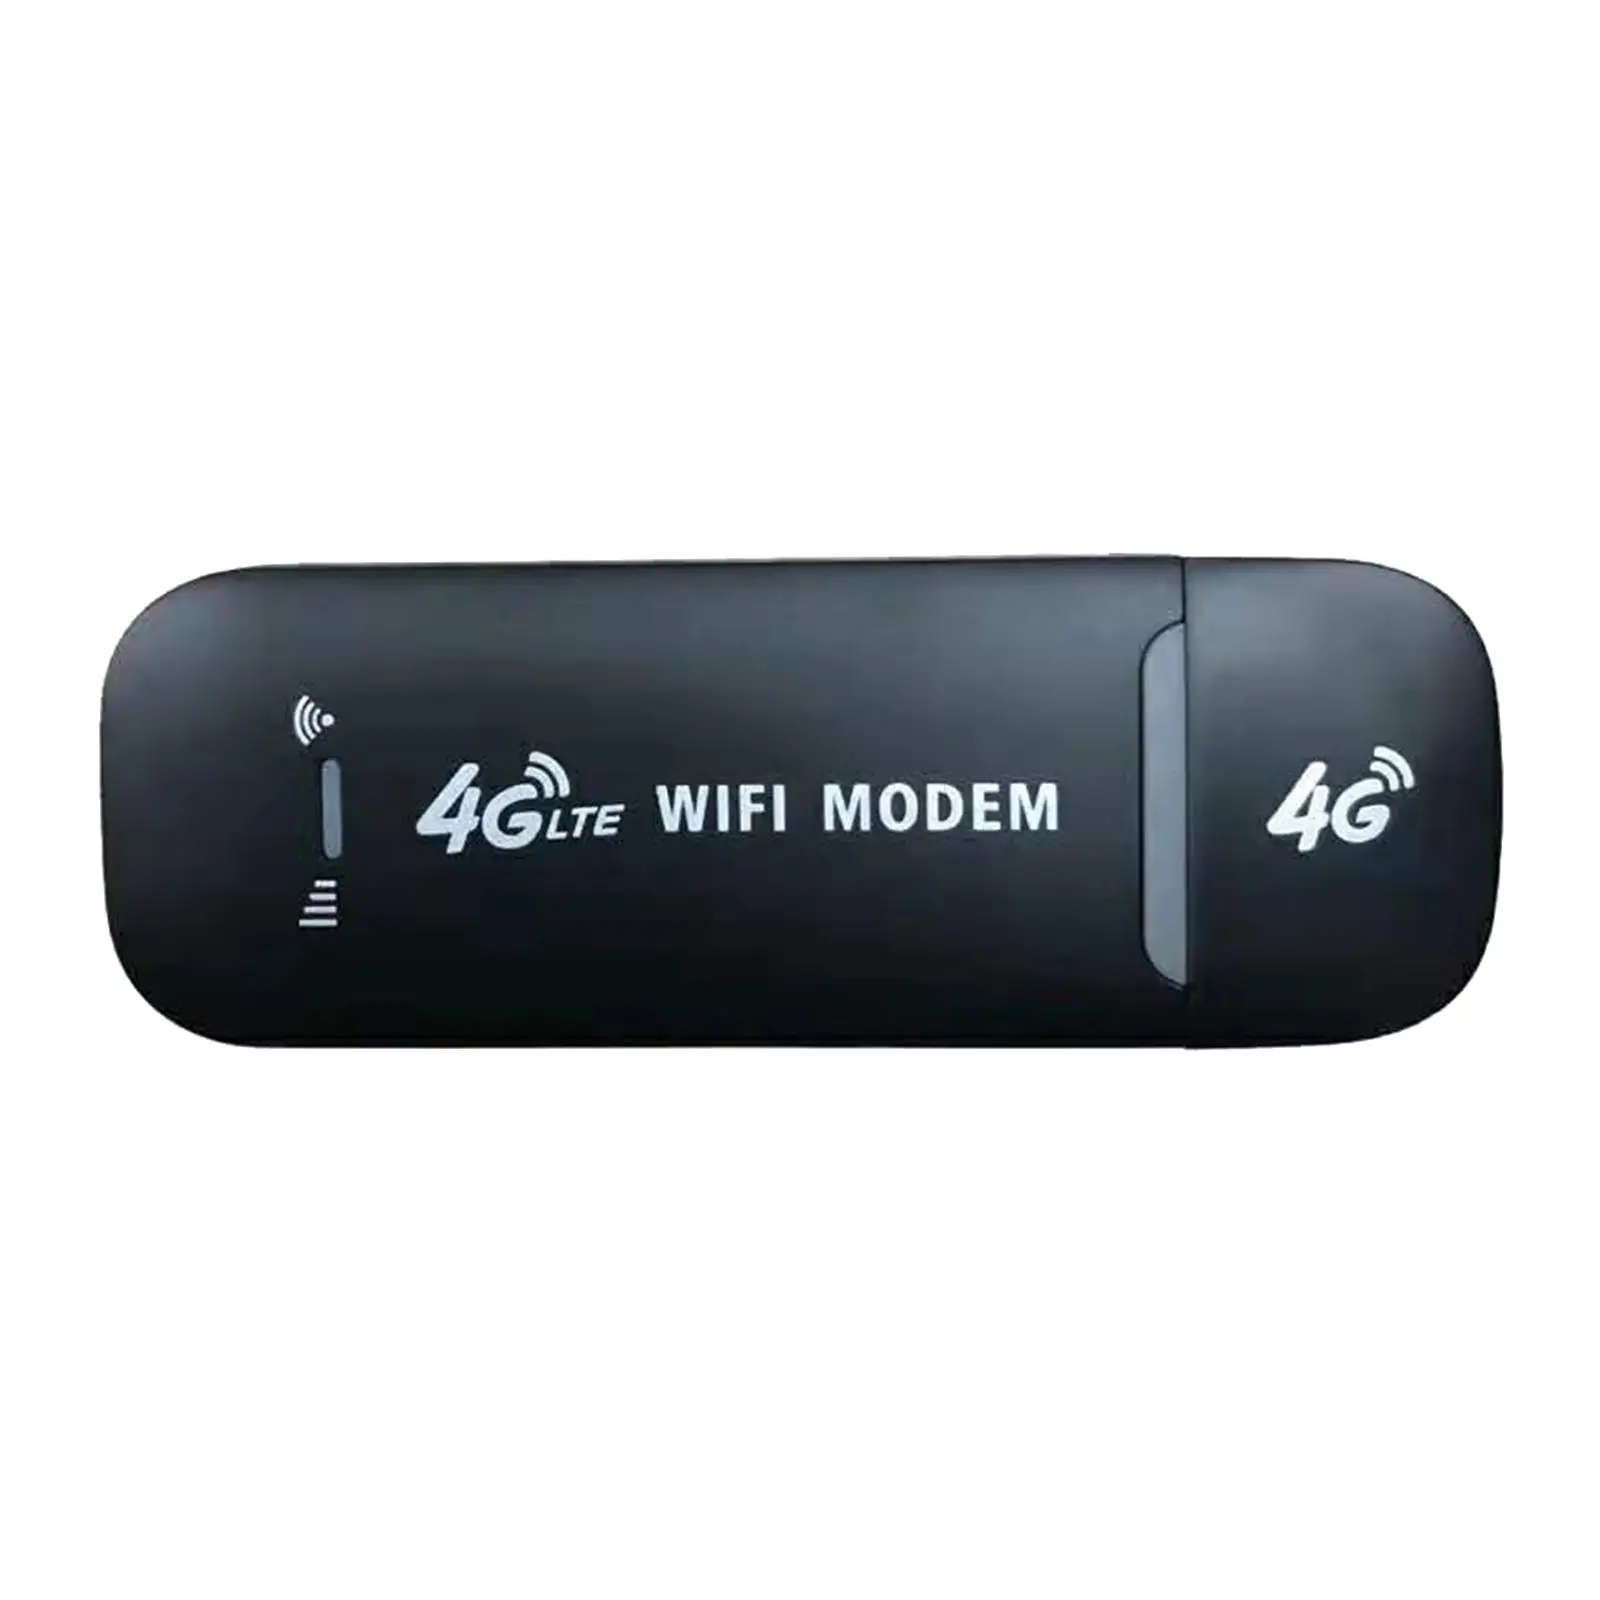 4G LTE USB Modem Dongle 150Mbps Mobile Broadband Unlocked W/Sim Card Slot Pocket Network Adapter Stick WiFi Router for Laptop PC